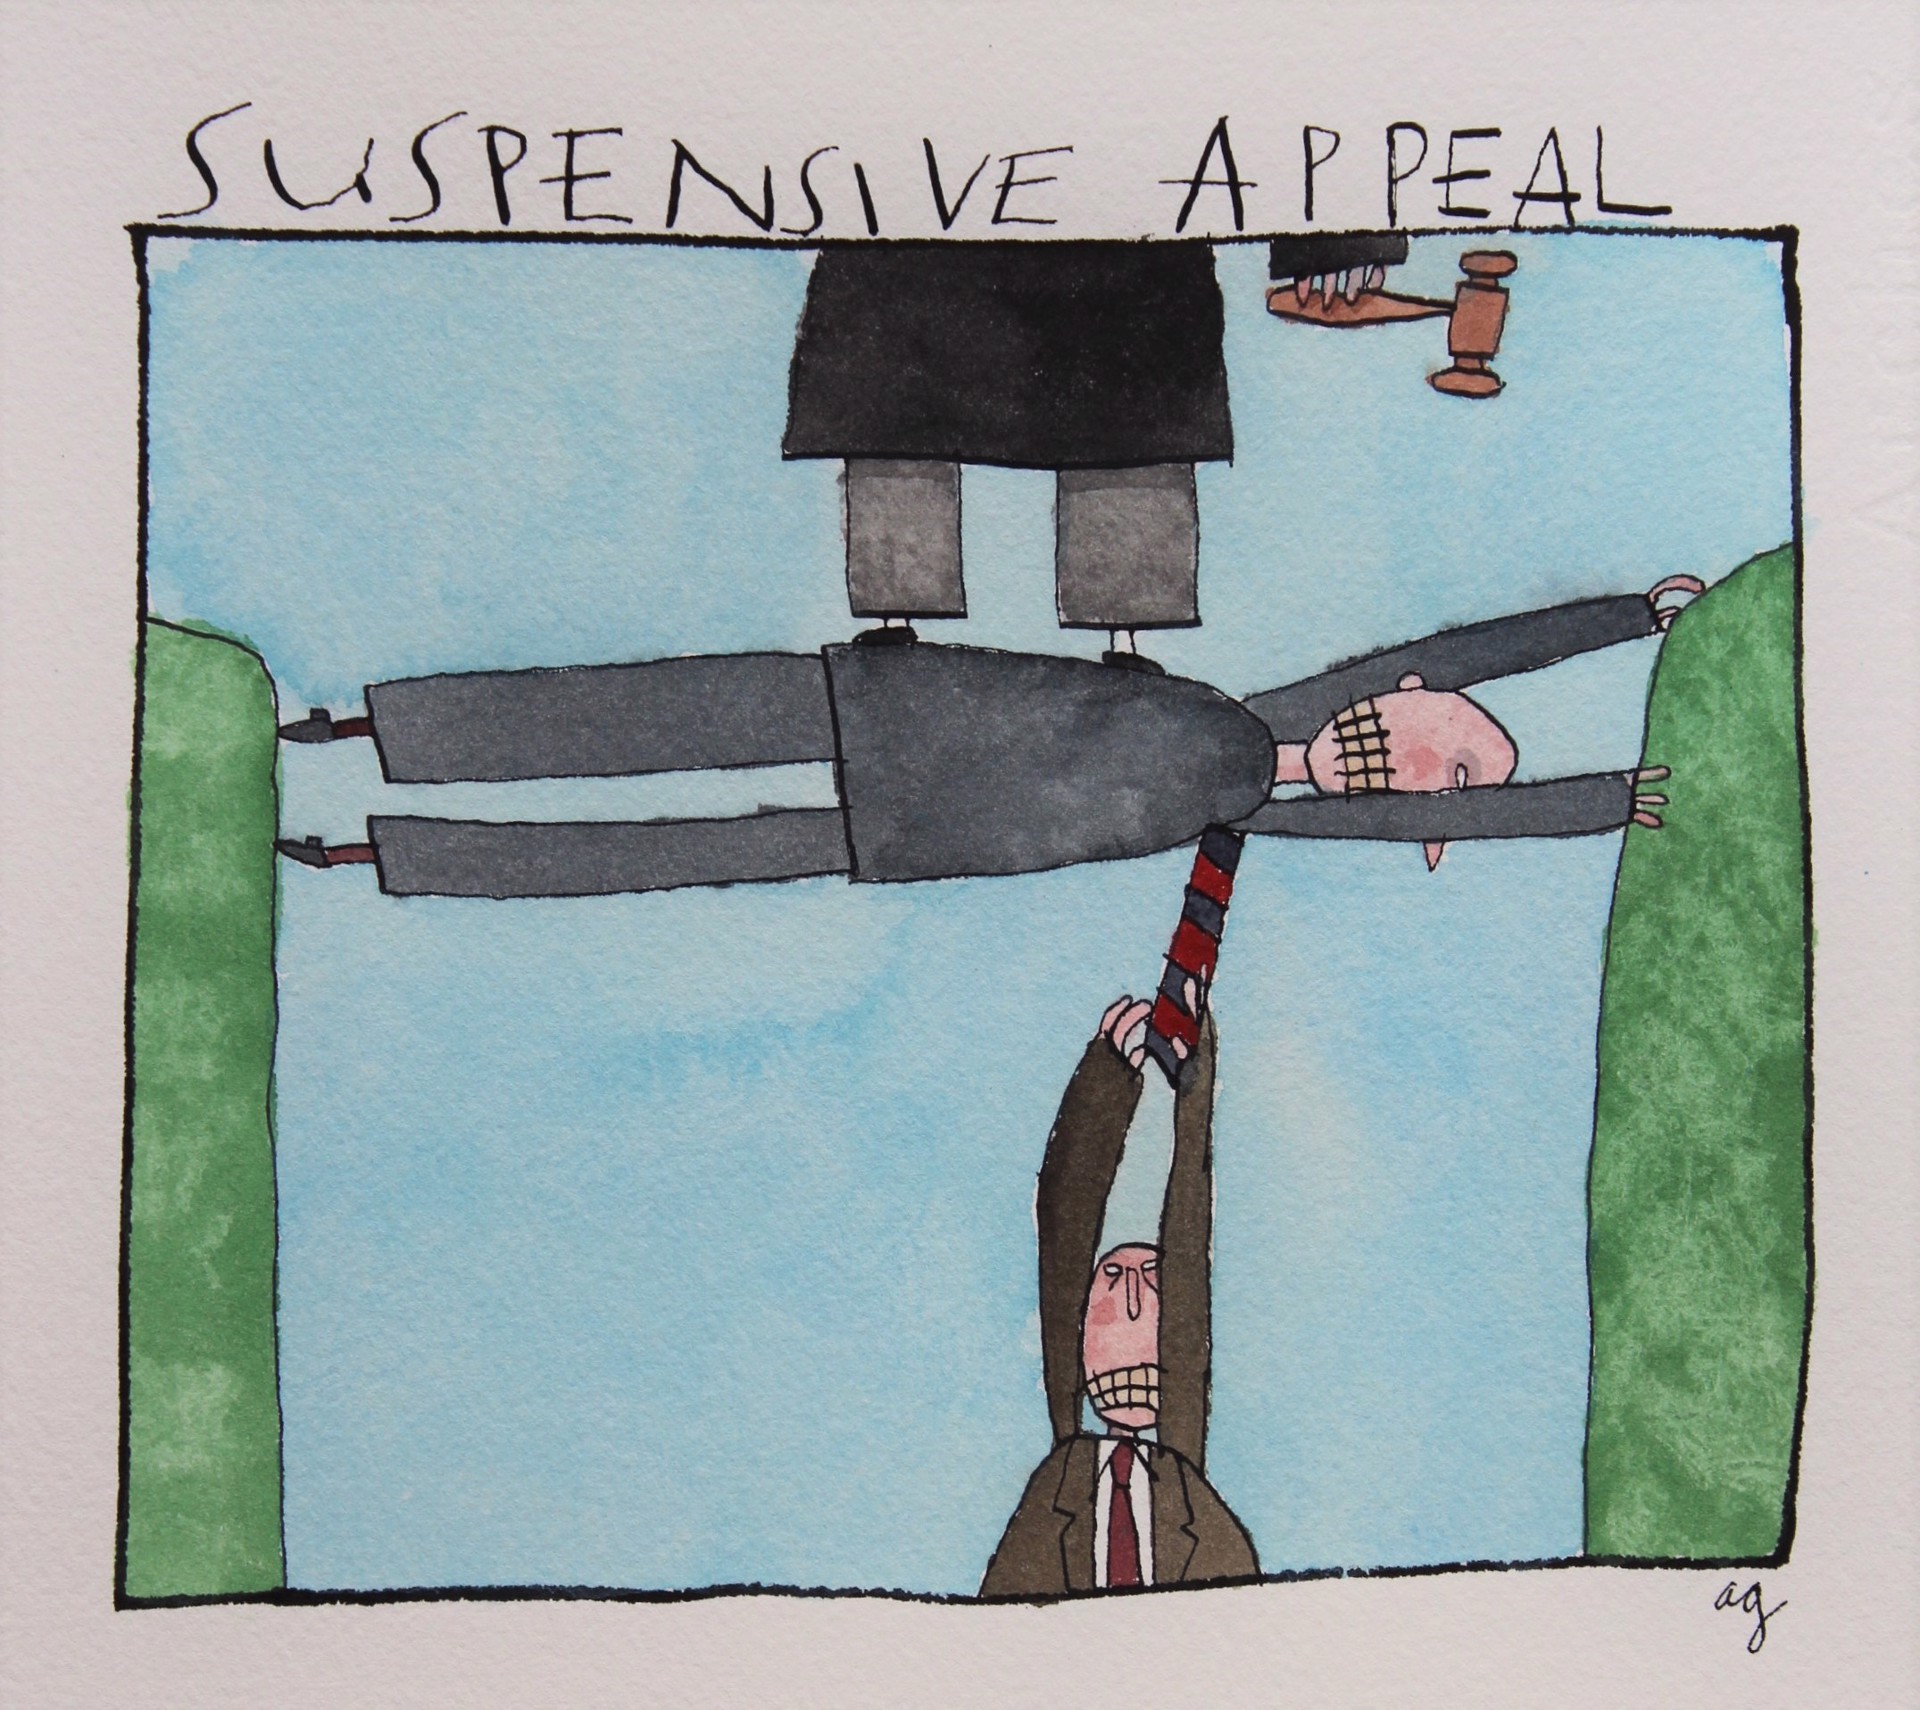 Suspensive Appeal by Alan Gerson